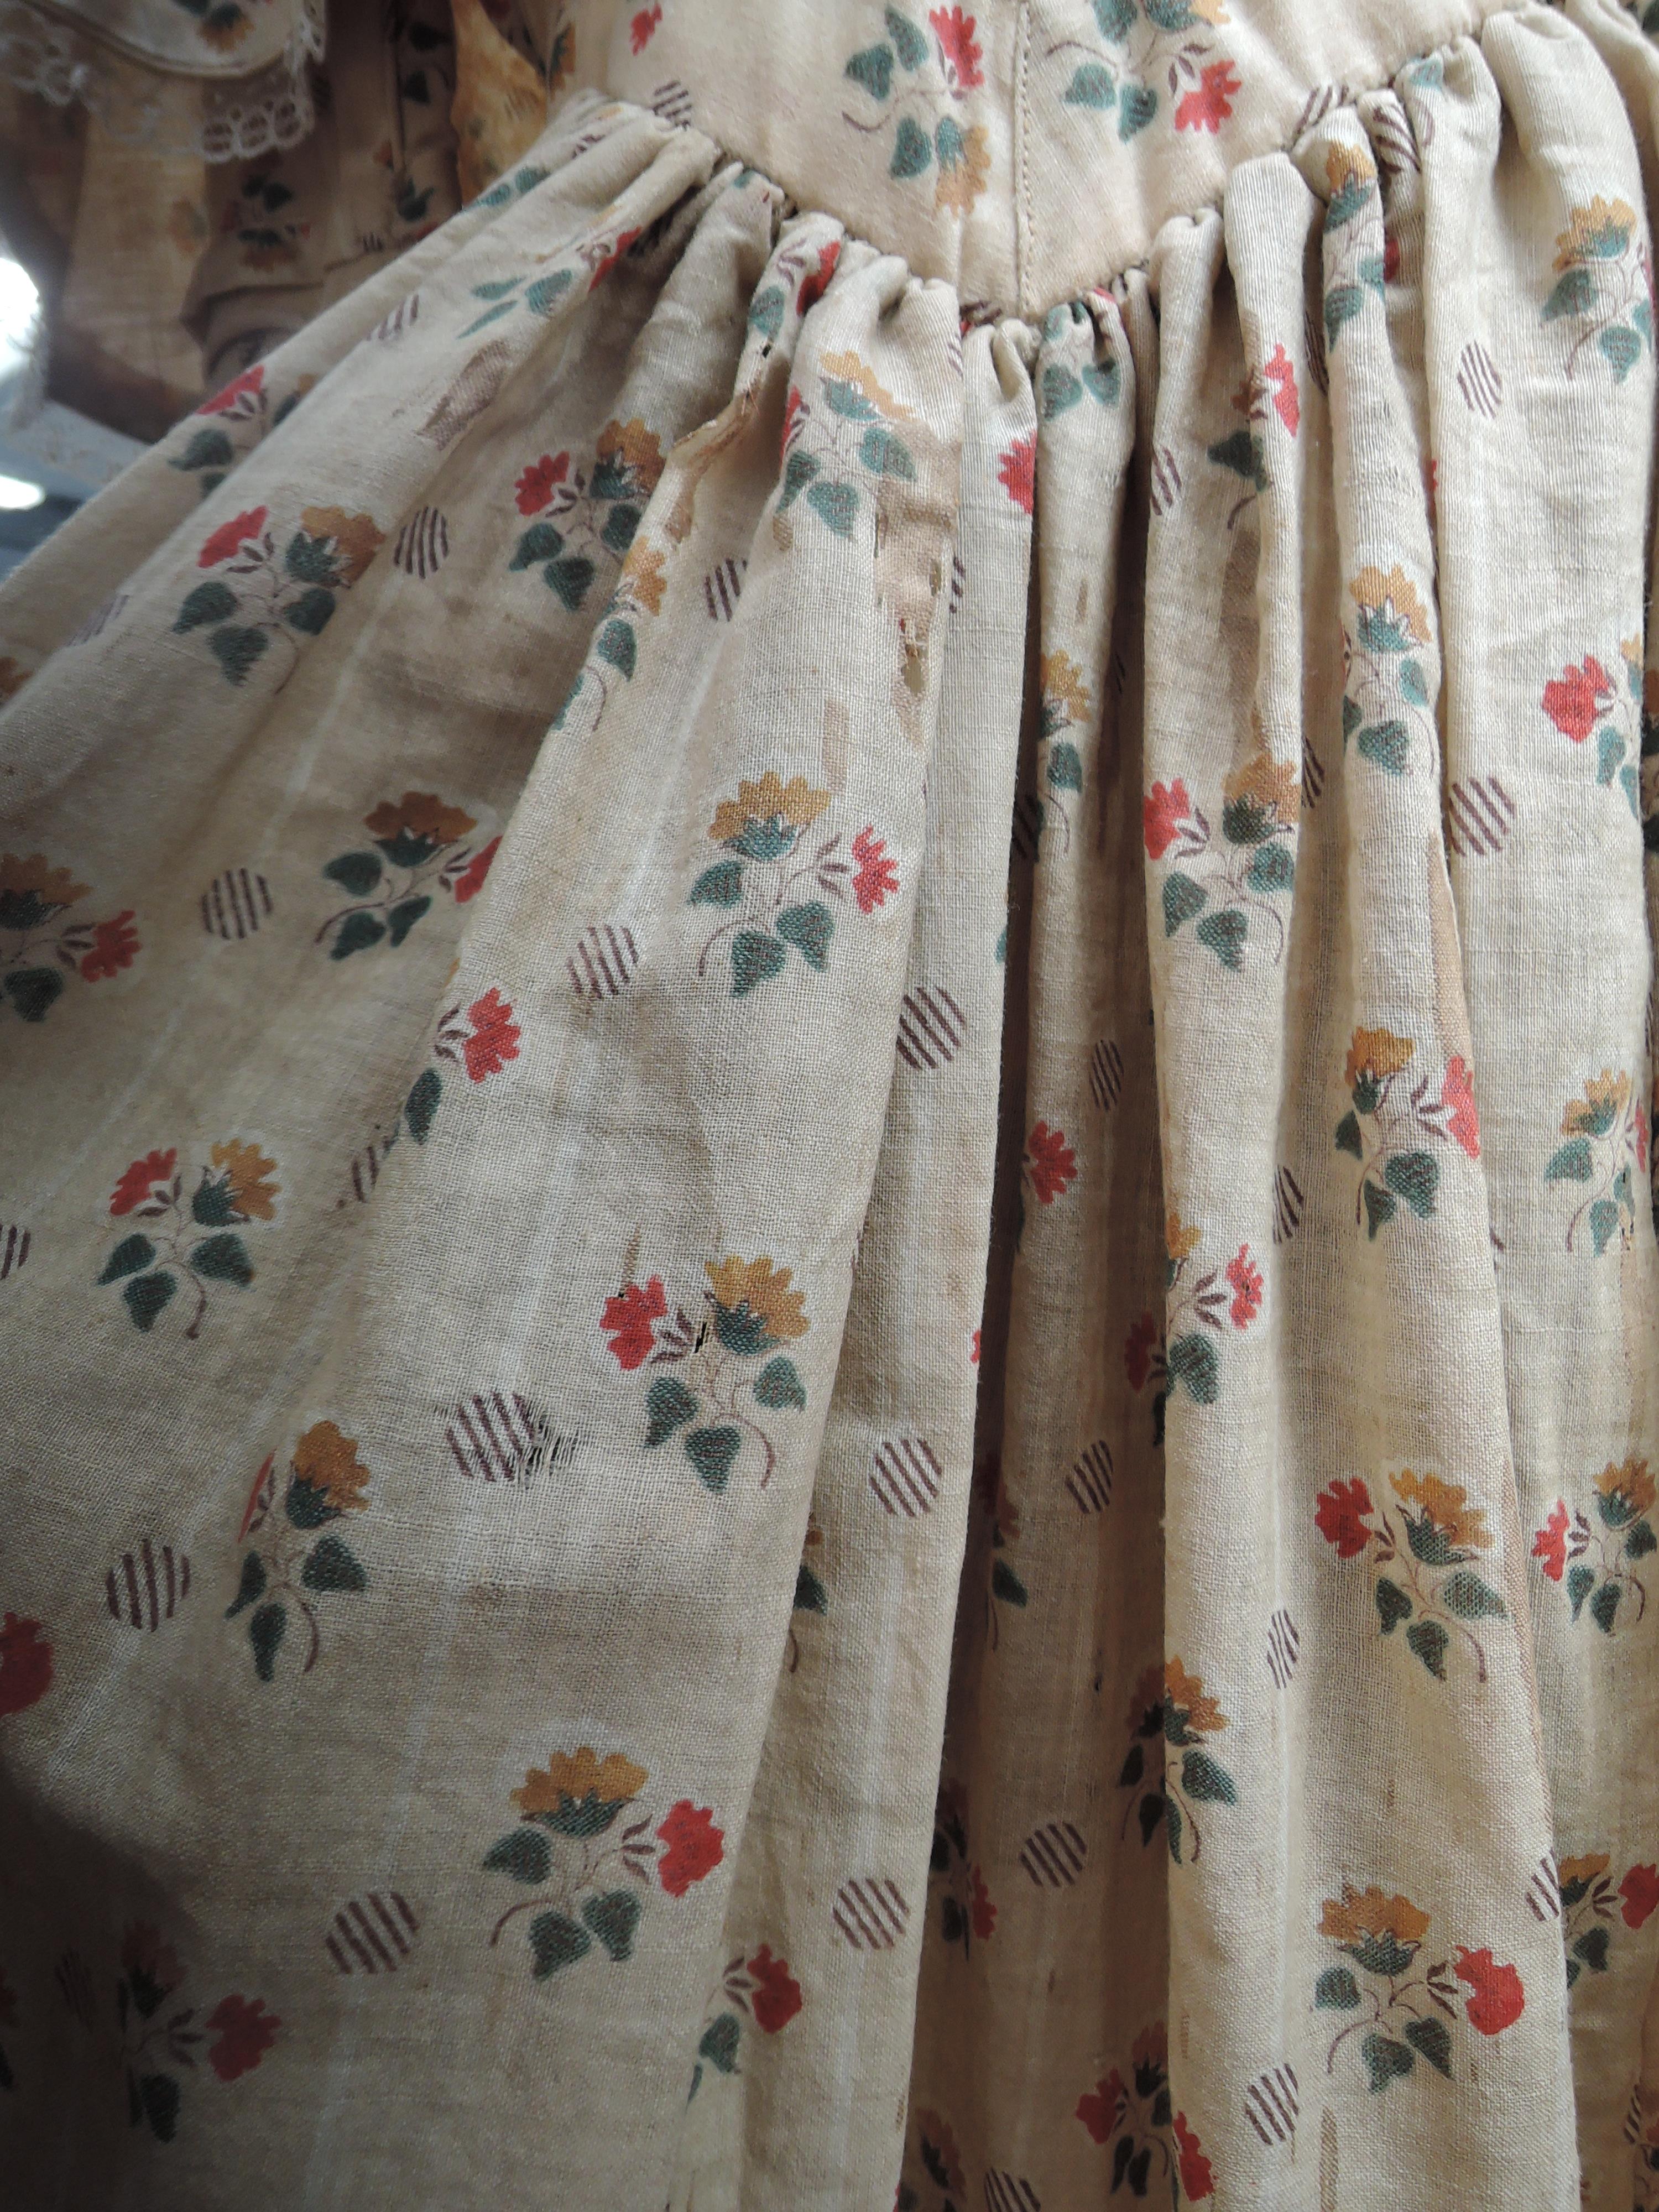 A Victorian cotton dress and lace edged cape having floral print on beige ground, superb details - Image 9 of 10